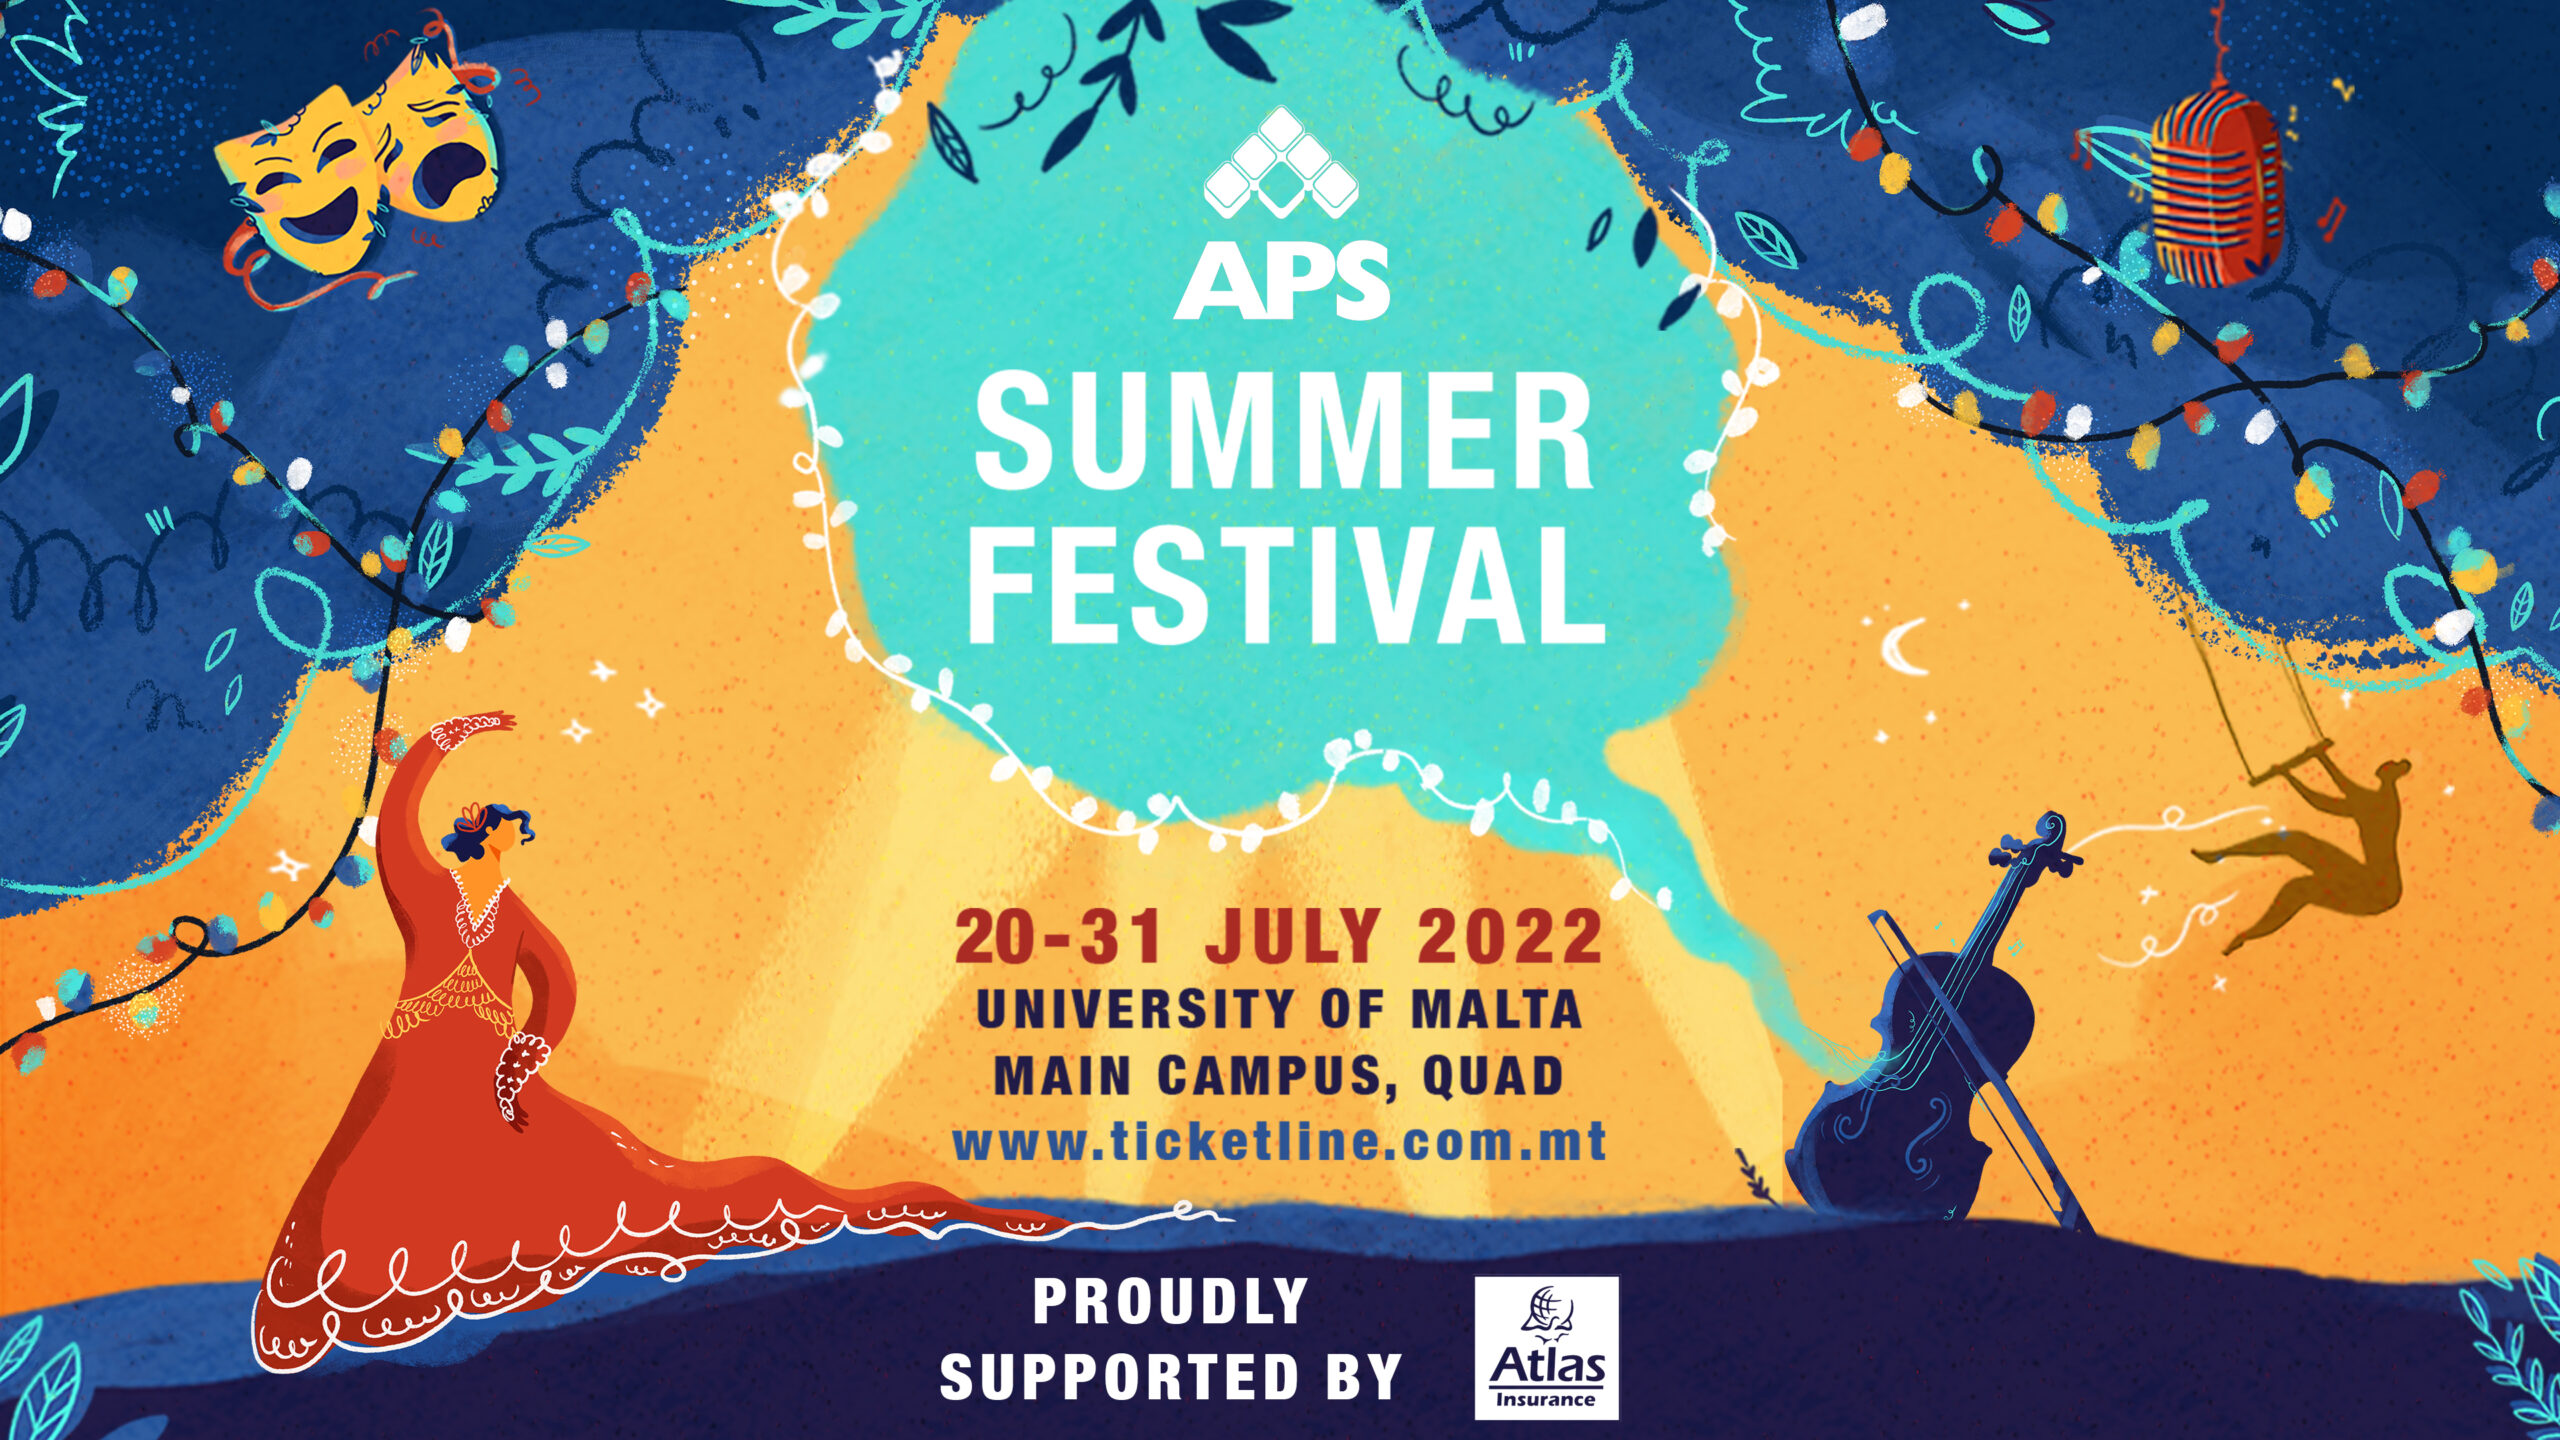 Atlas Insurance supports APS Summer Festival for second year running